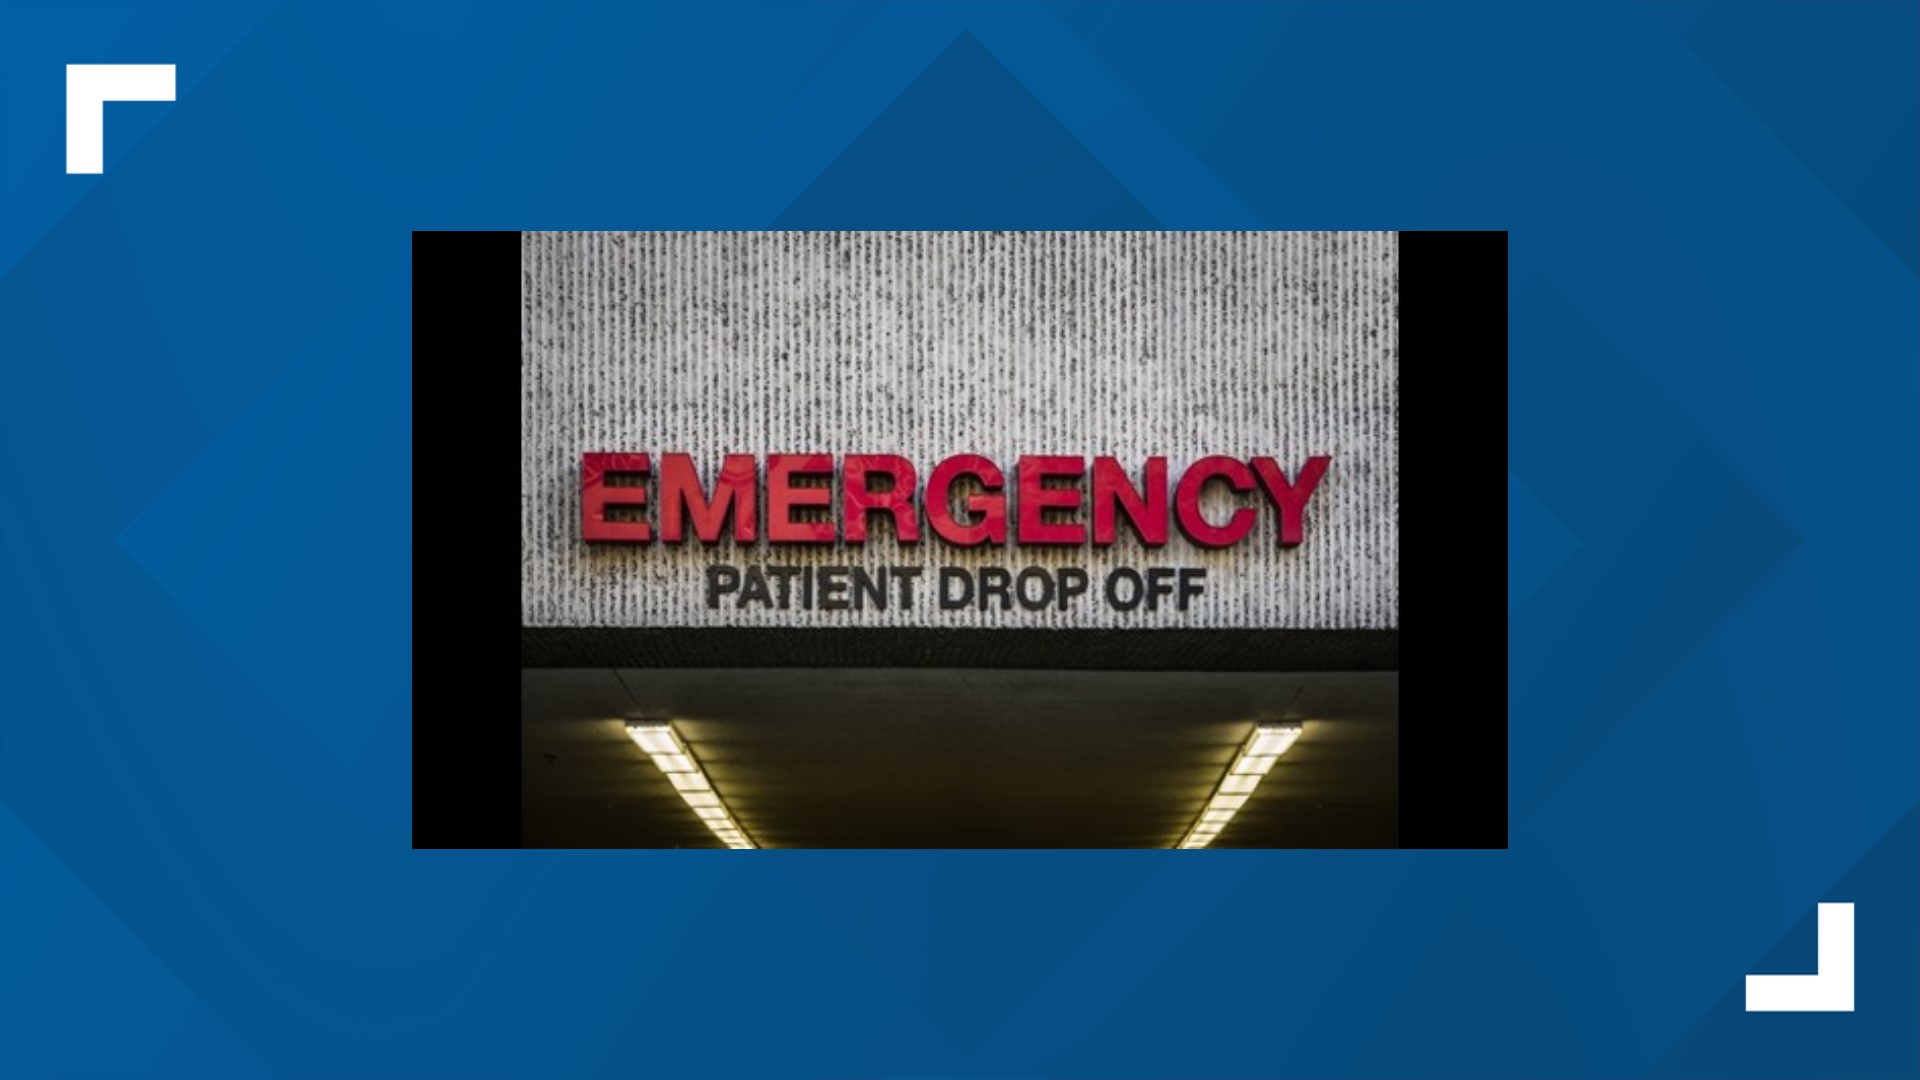 Lancaster General Health says its emergency room reached an all-time high on Jan. 3, with 428 people visiting that day.